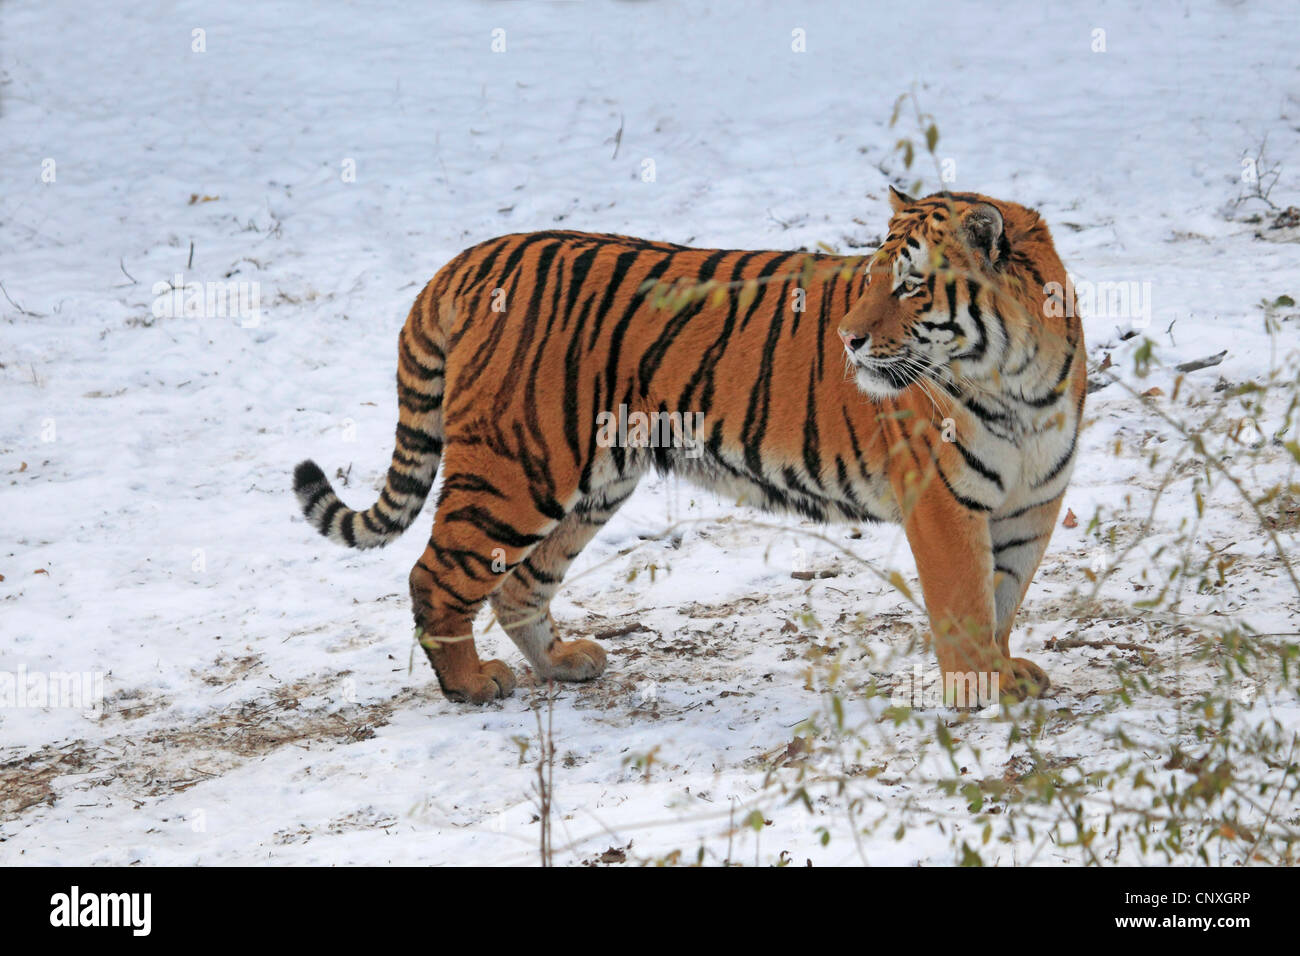 Siberian tiger, Amurian tiger (Panthera tigris altaica), standing on snow-covered ground Stock Photo